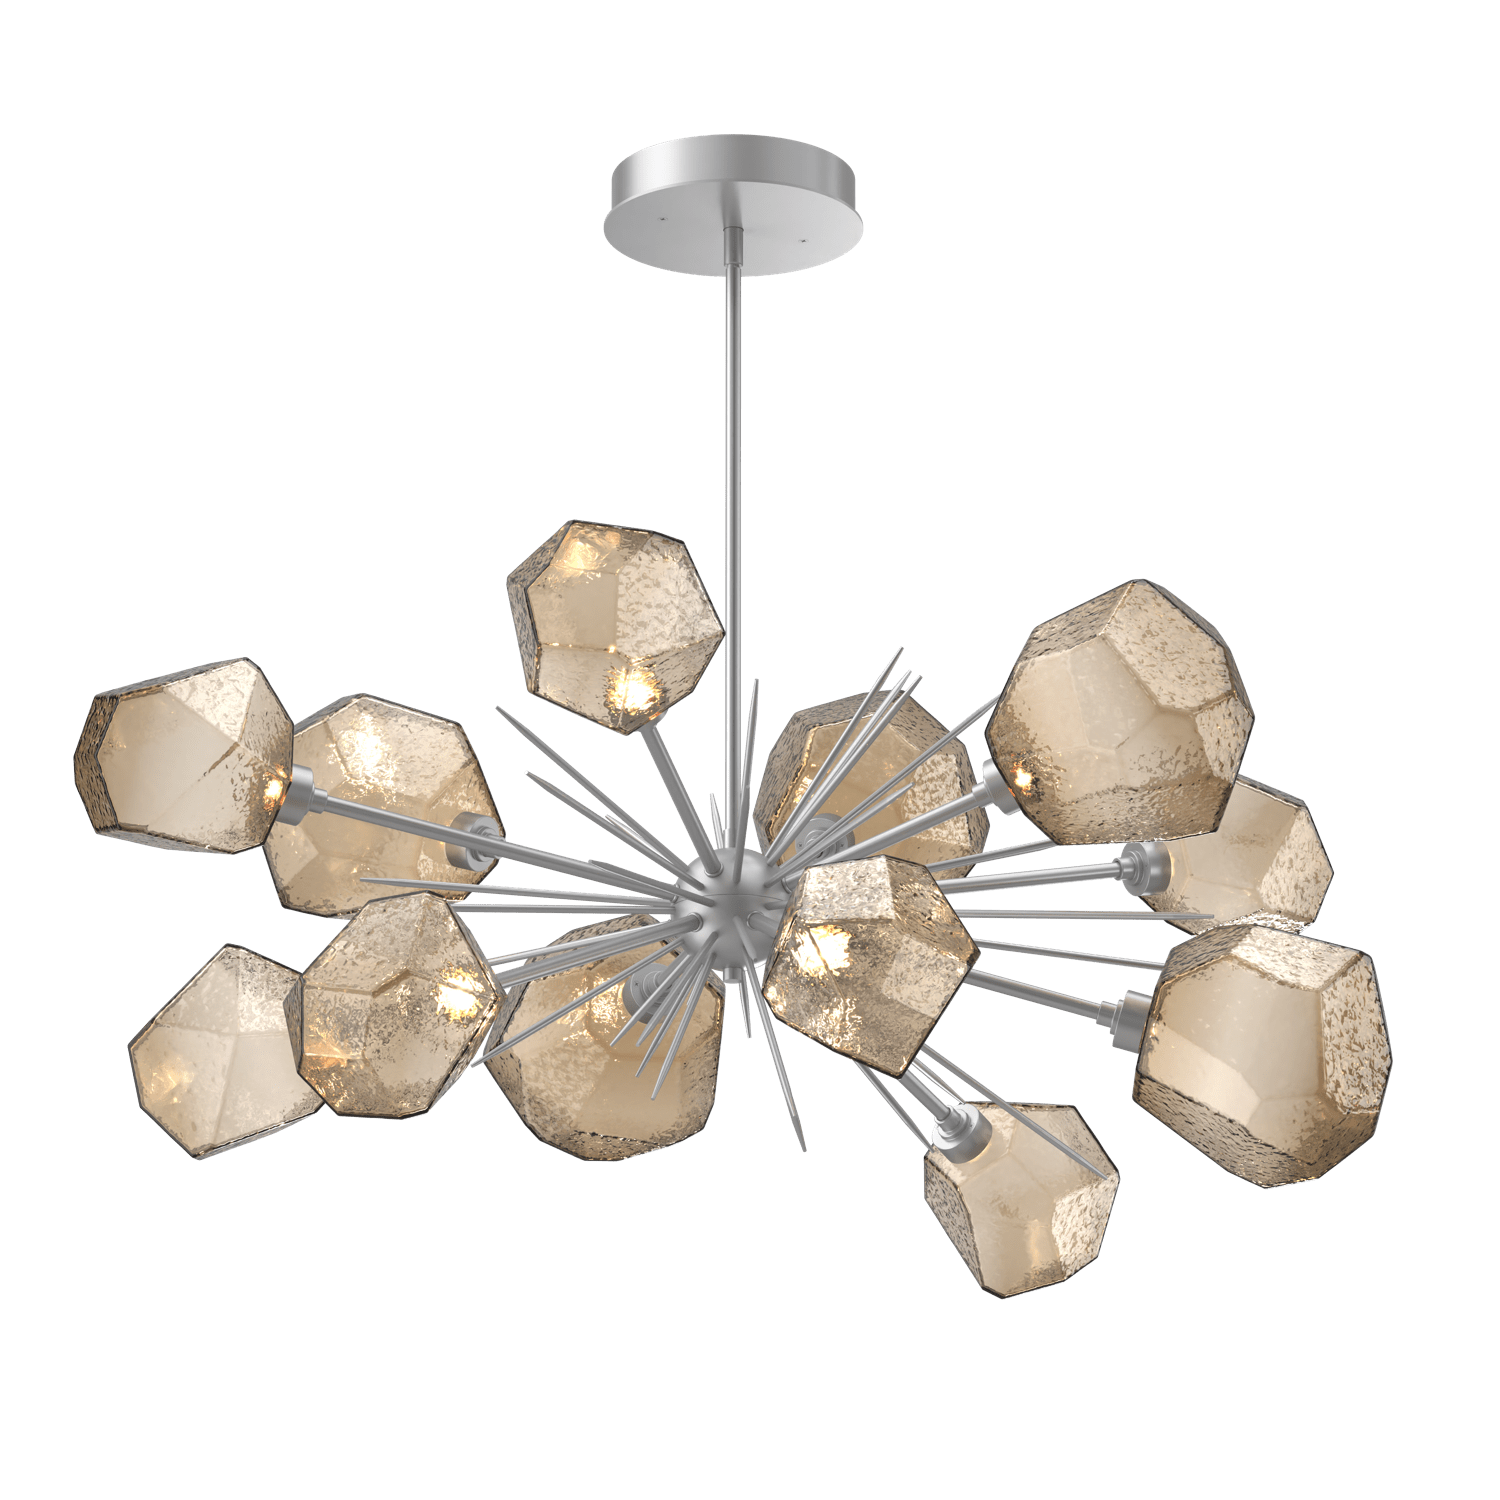 PLB0039-0D-CS-B-Hammerton-Studio-Gem-43-inch-oval-starburst-chandelier-with-classic-silver-finish-and-bronze-blown-glass-shades-and-LED-lamping